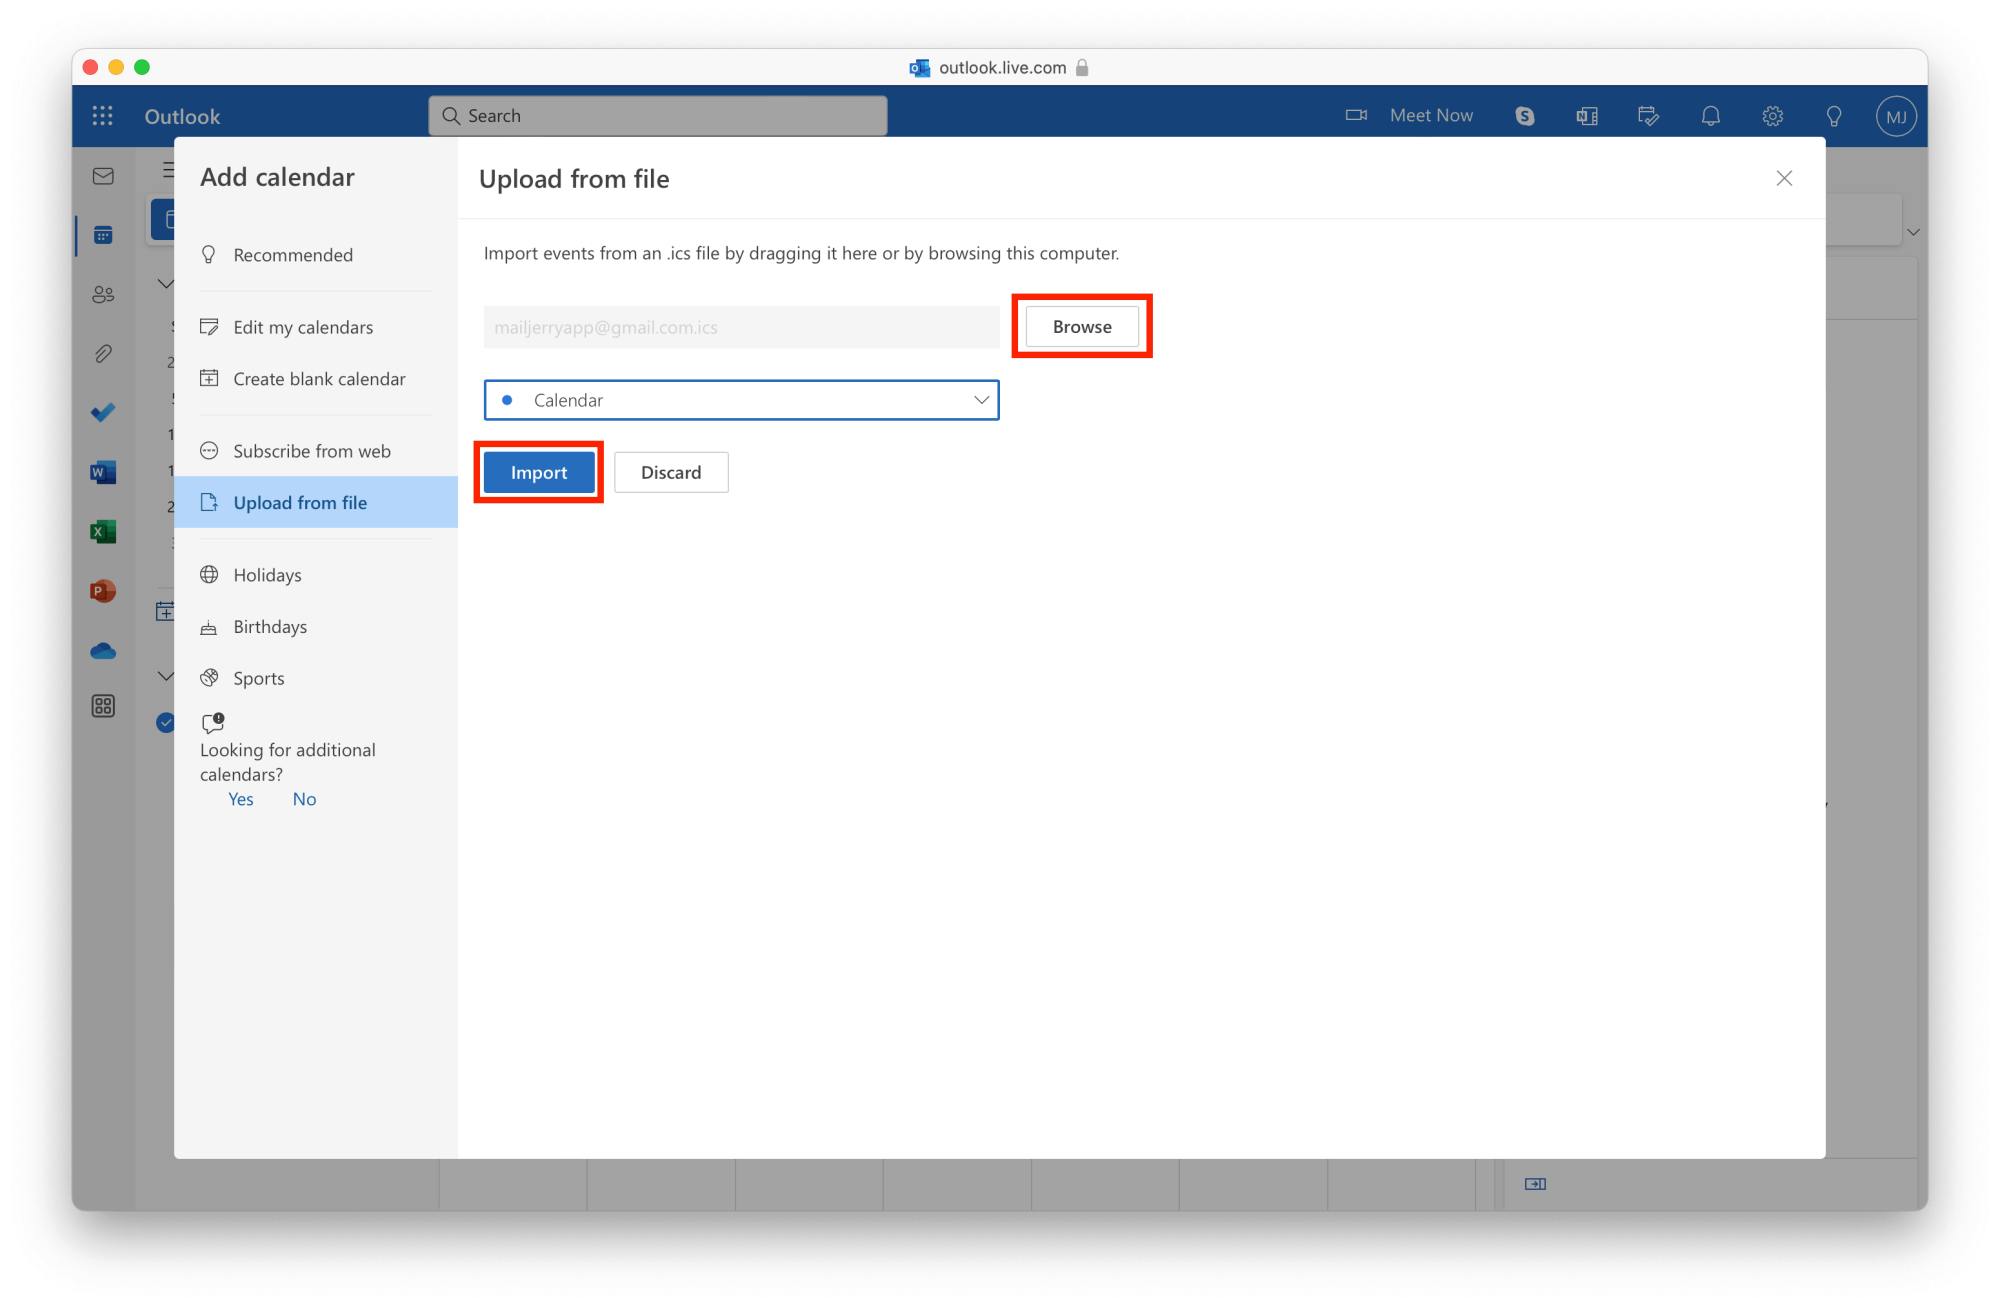 Migrate G Suite to Office 365: Import calendar to Office 365 – Step 02